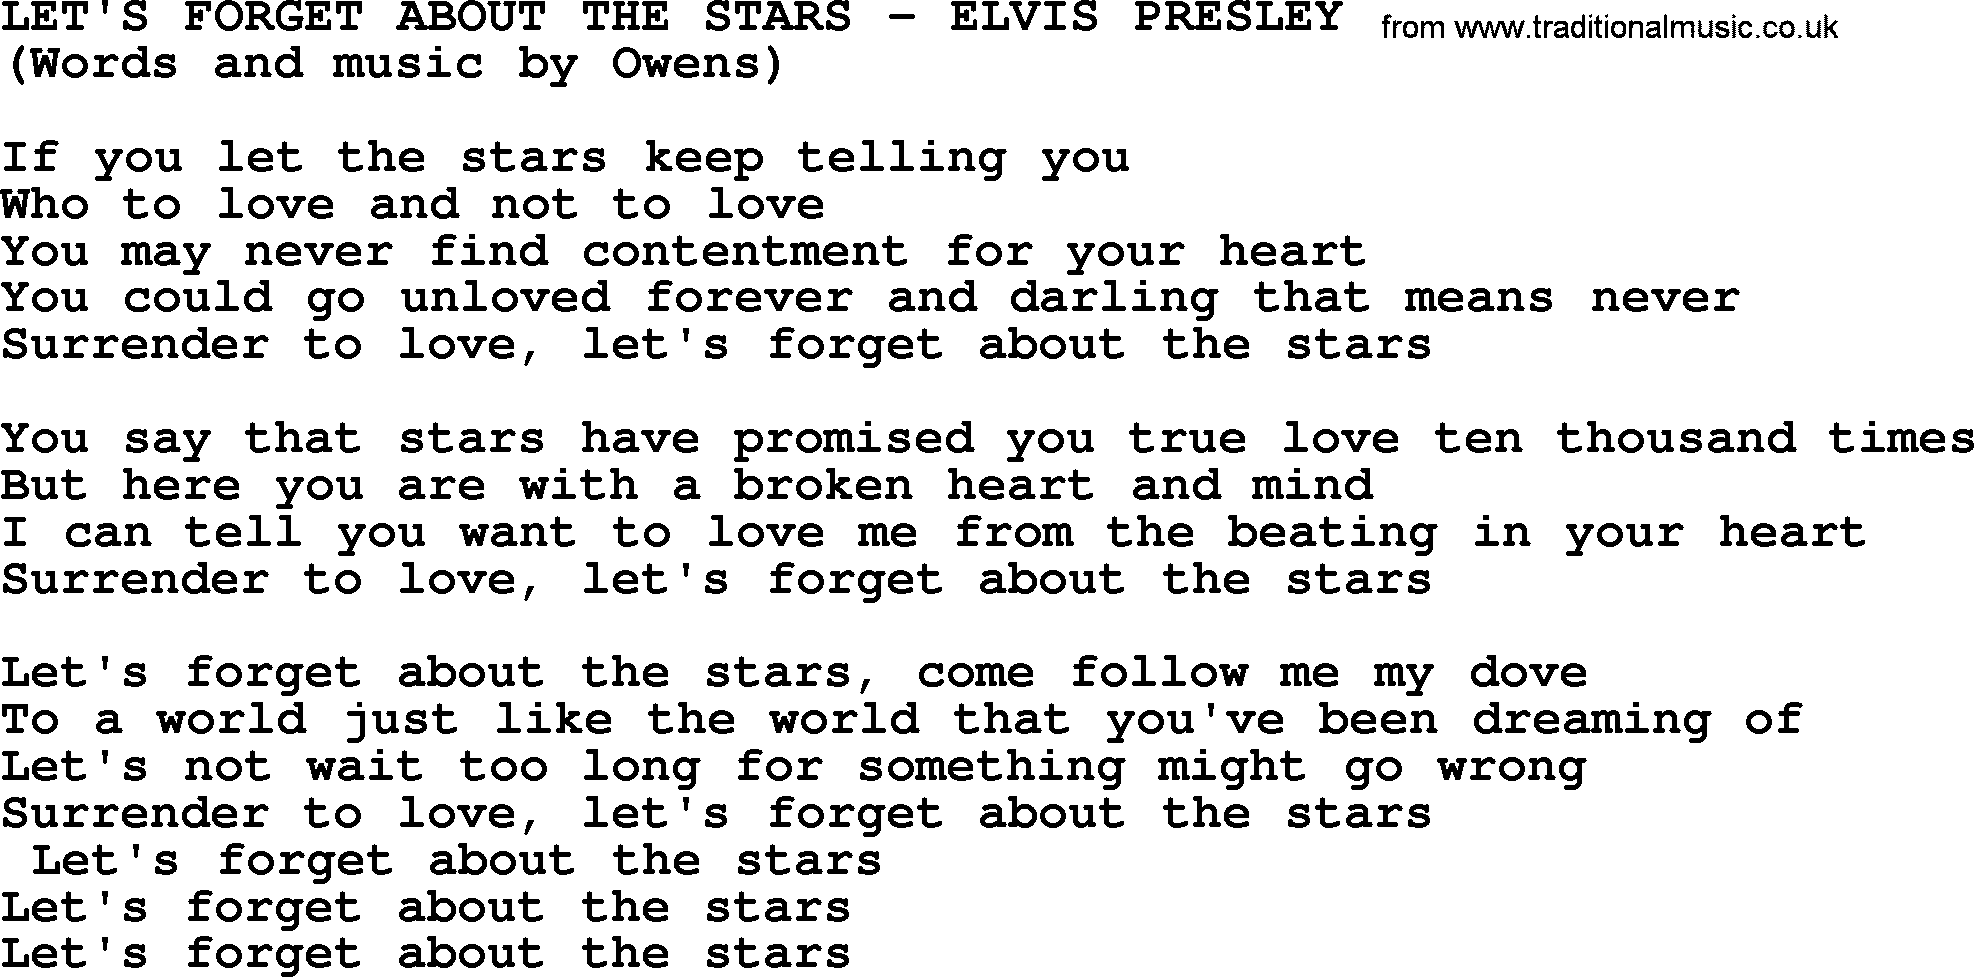 Elvis Presley song: Let's Forget About The Stars lyrics